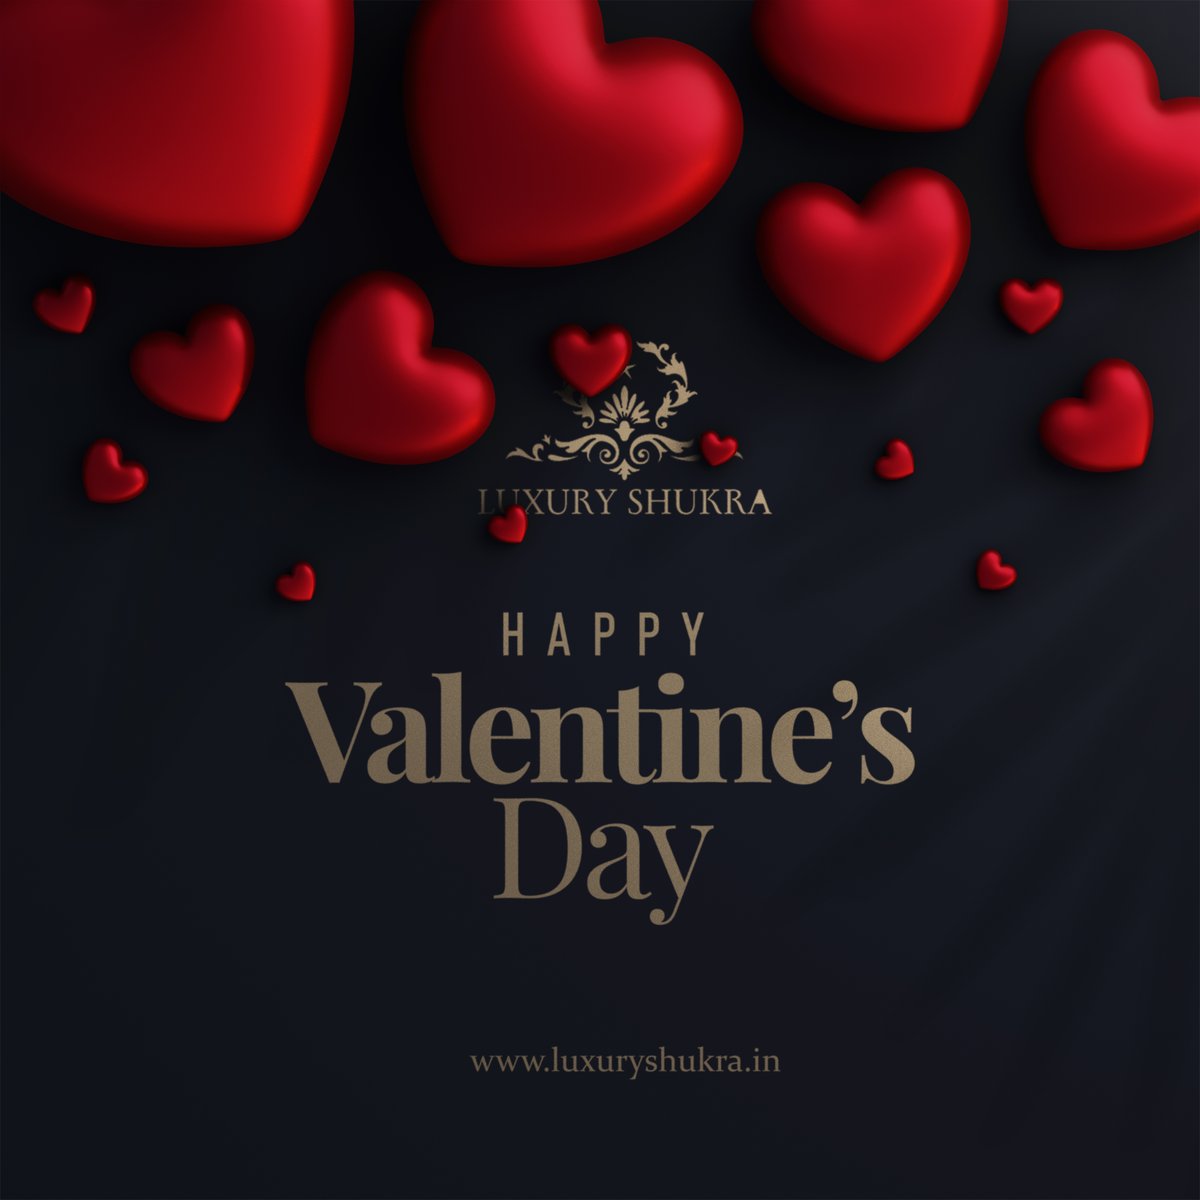 Treat your loved one to something special this Valentine's Day! ❤️ Save big at our Happy Valentine's Day Sale with #cashondelivery and #freedeliver
shop now at : luxuryshukra.in #valentinesdaysale❤️ #happyoffers #sale #luxuryshukra #loveatheart #theperfectgift #specialone